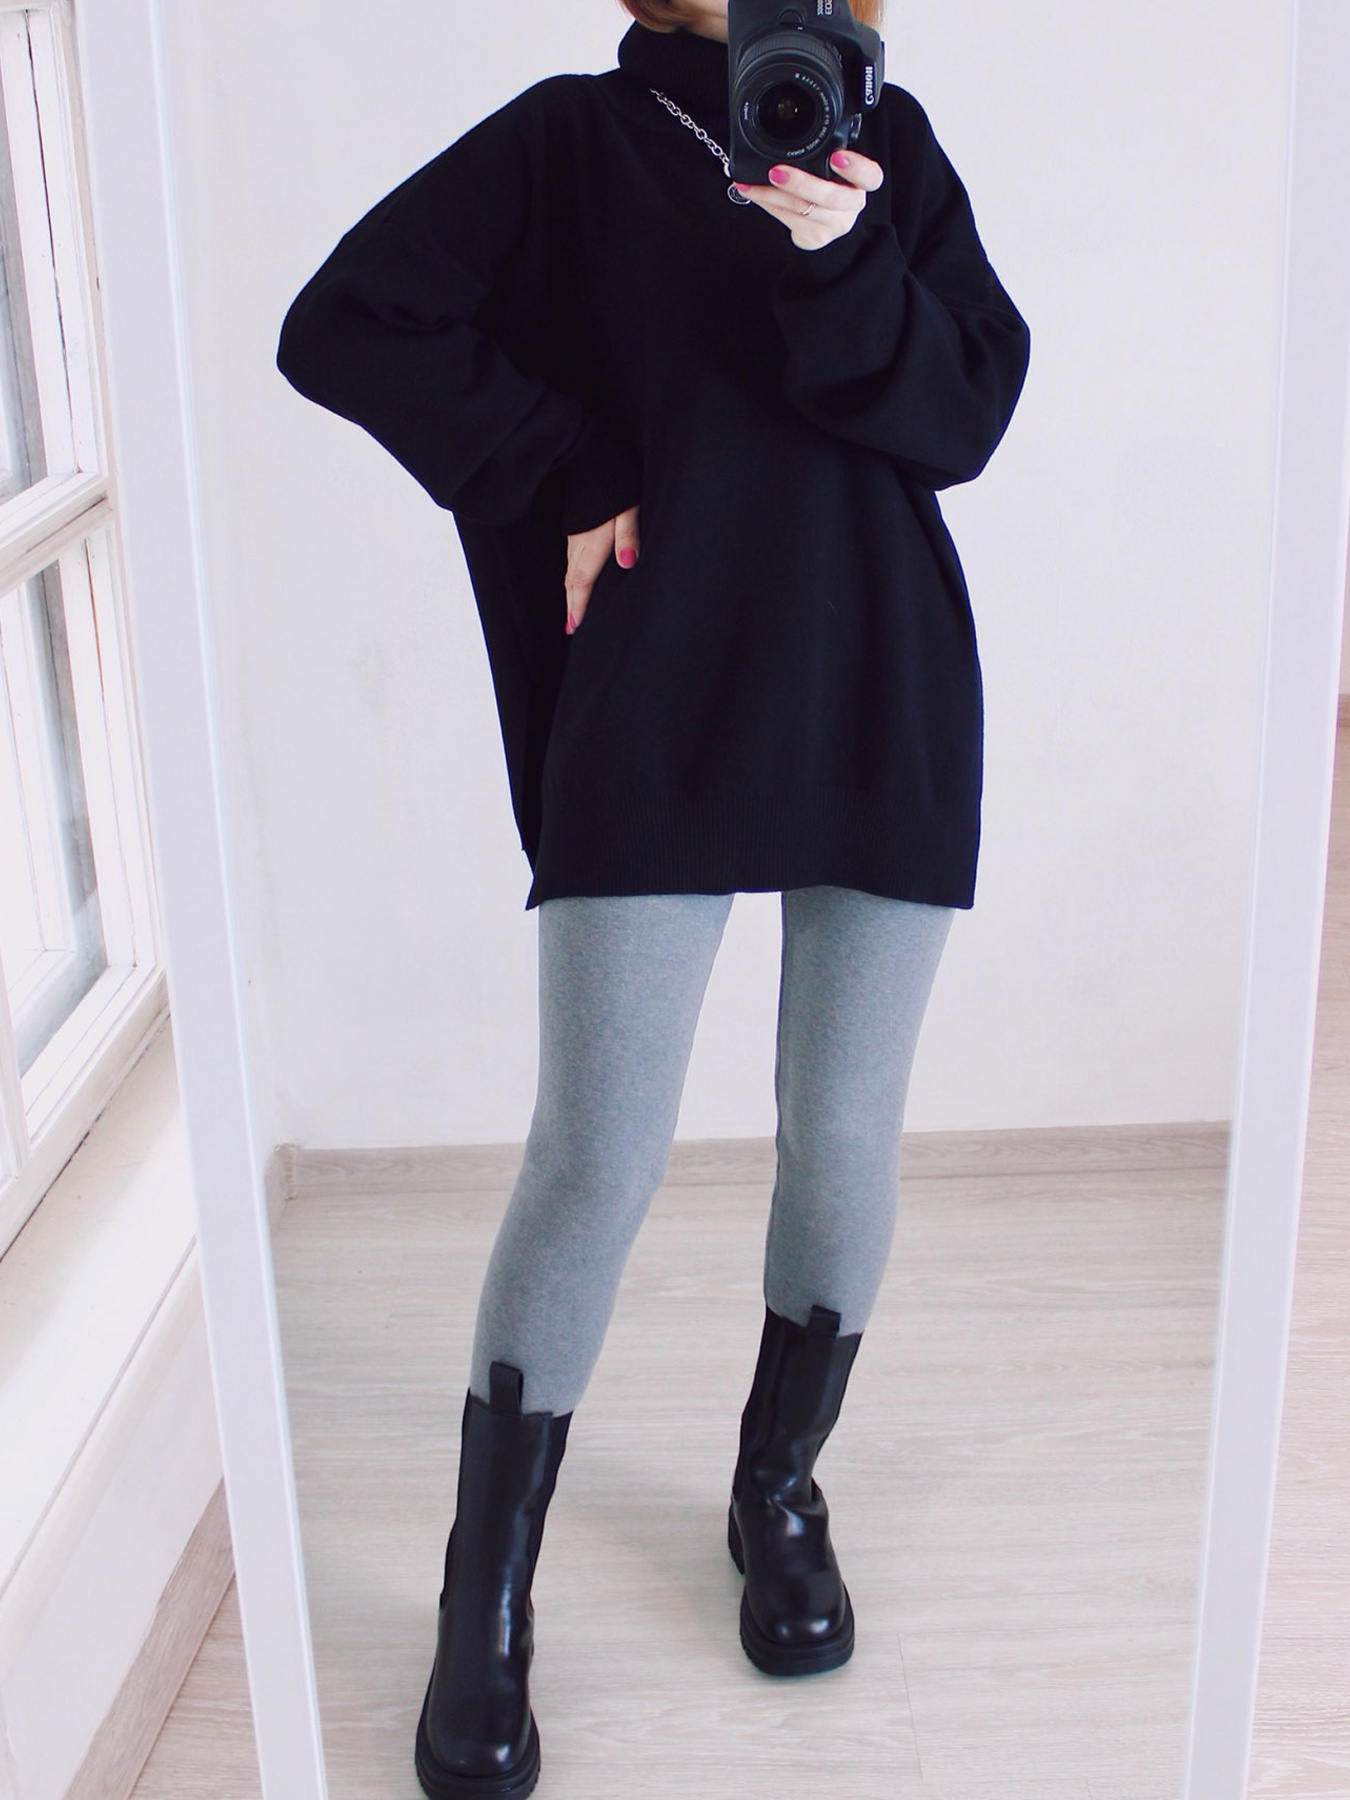 Ribbed High Waist Woolen Leggings Warm Cotton, Fashionable & Casual,  Threaded, 2XL Black Pants For Autumn/Winter Style 231018 From Lu003, $9.6